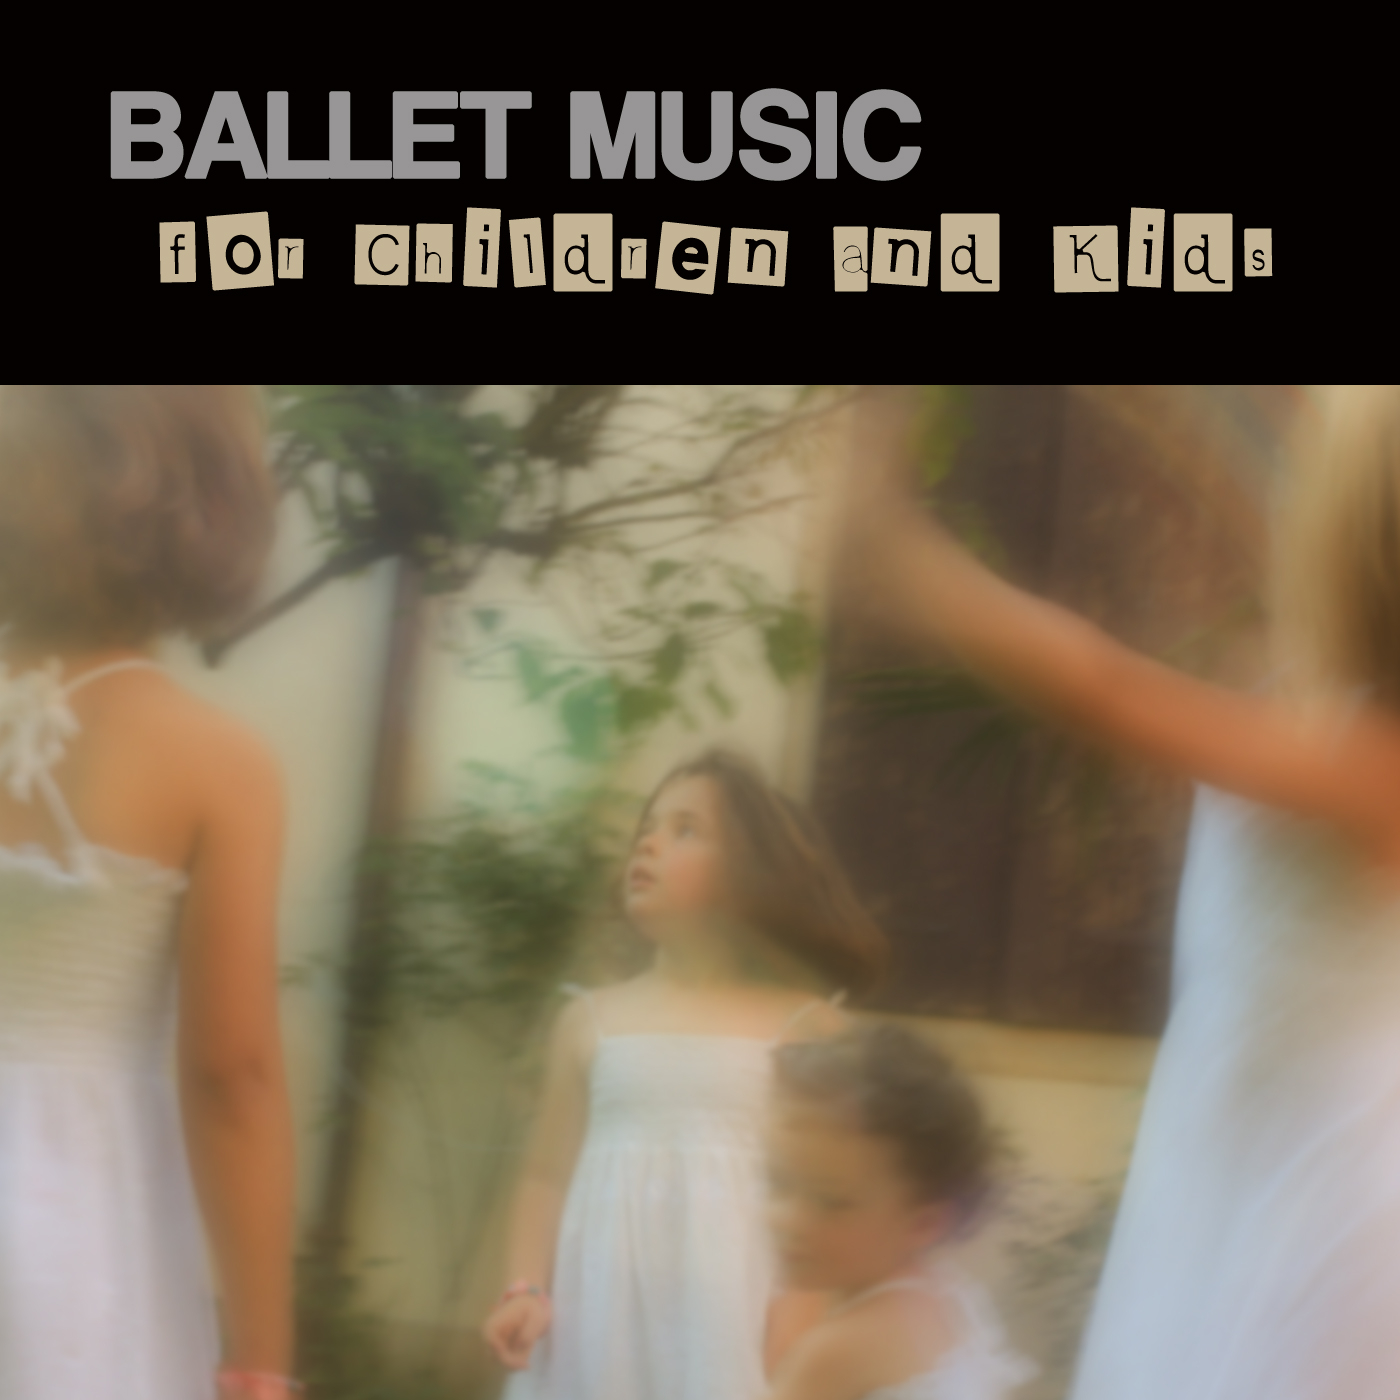 Ballet Music for Children and Kids - Classical Dance Music for Children Ballet, Dance Schools, Dance Lessons, Dance Classes, Ballet Positions, Ballet Moves and Ballet Dance Steps 100% Music for Ballet Class